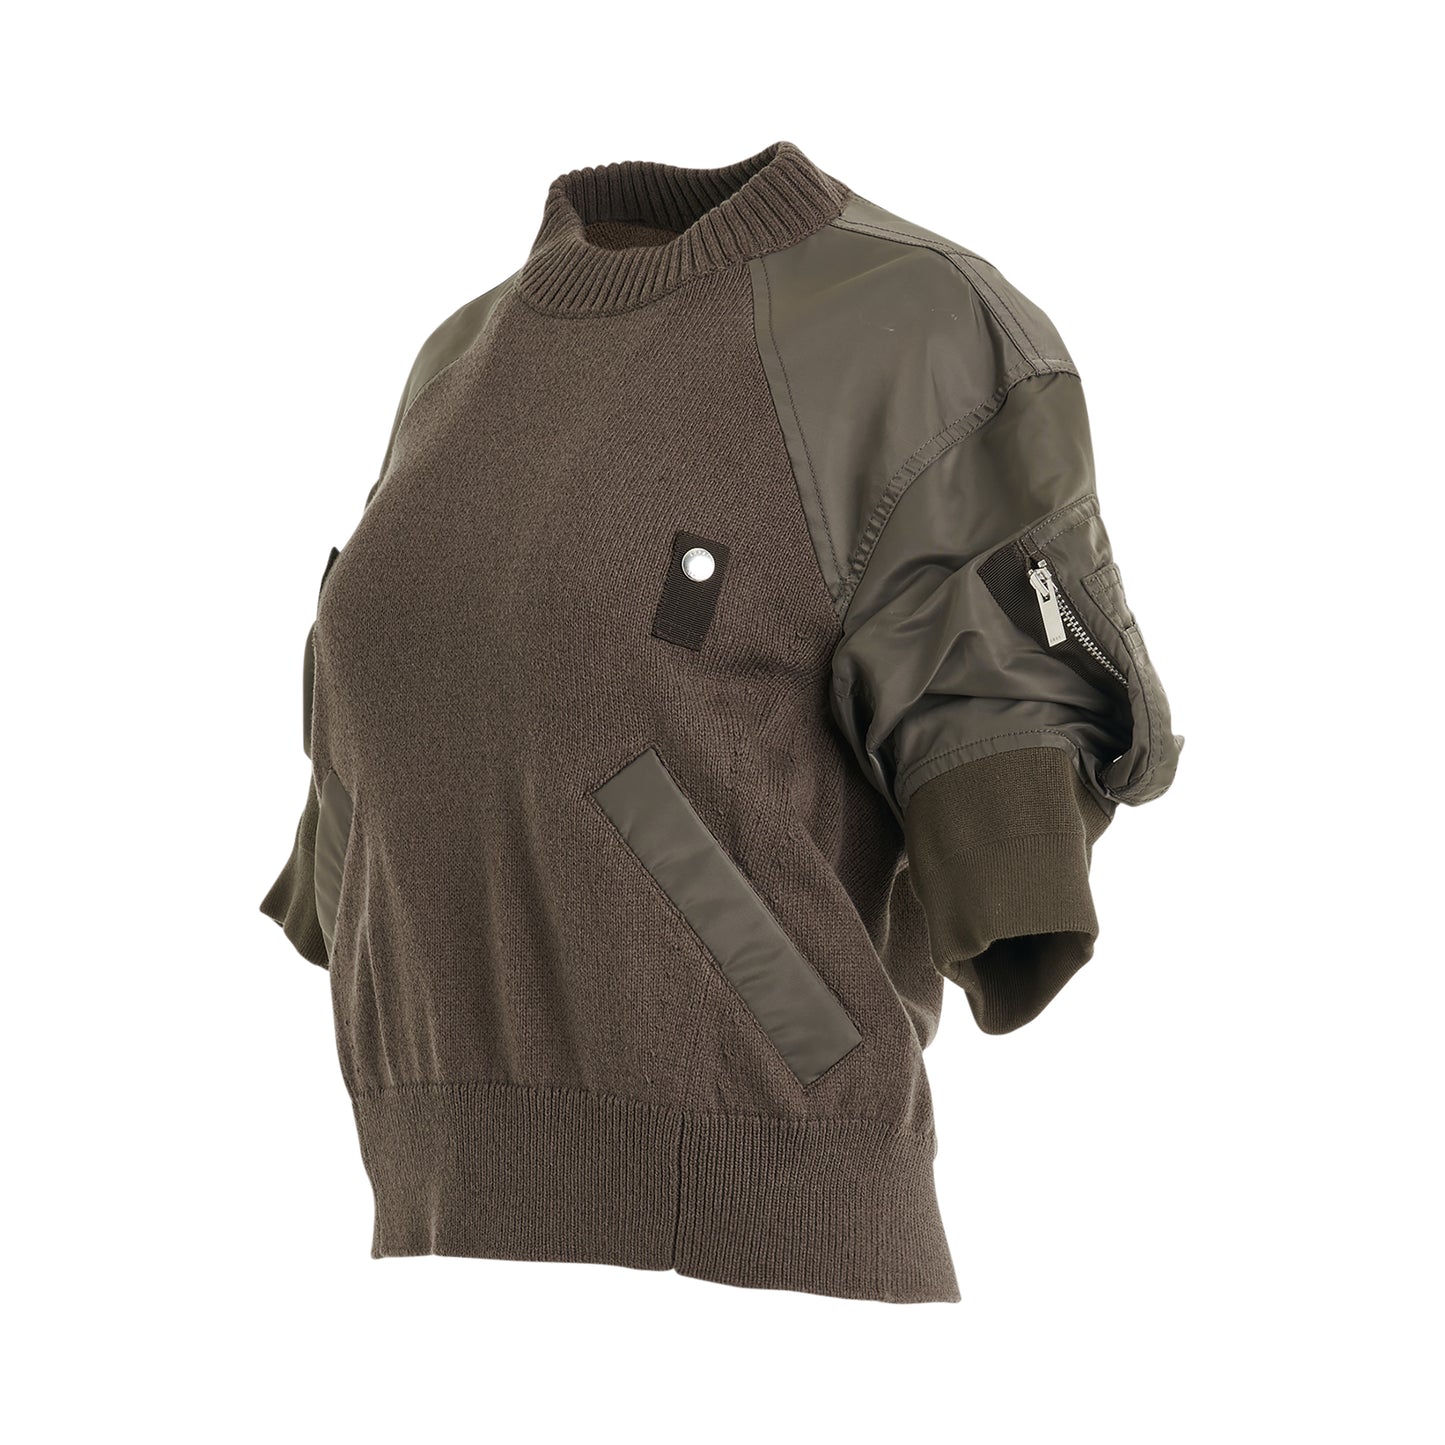 Nylon Twill x Knit Sweater in Taupe